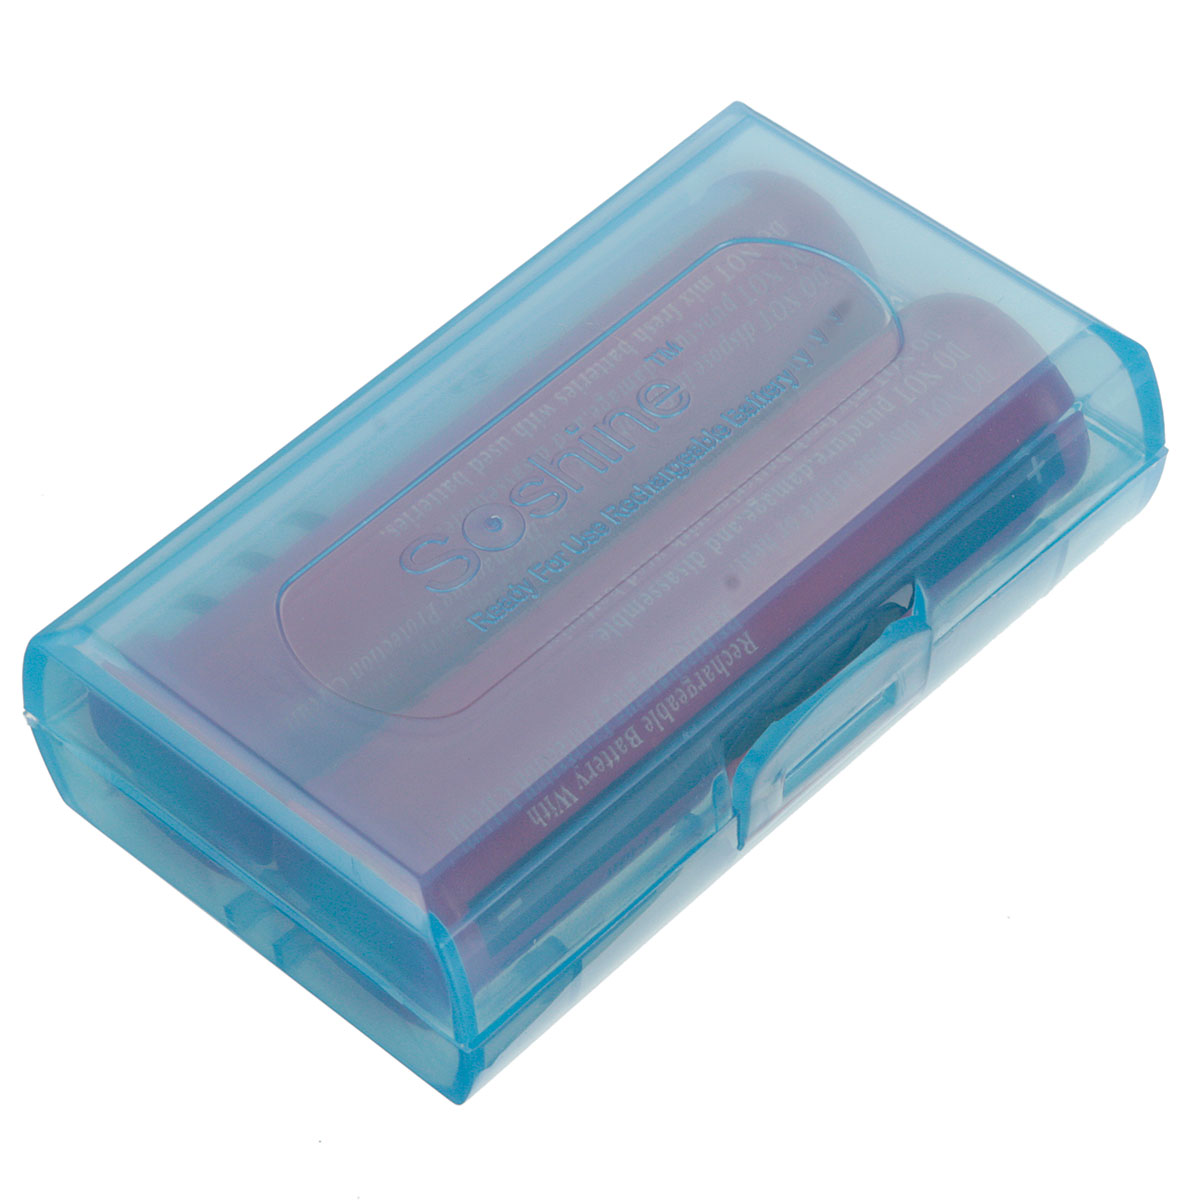 12X-Plastic-Dual-Sleeve-Cover-Case-Storage-Box-for-18650-16340CR123A-Battery-1963674-6